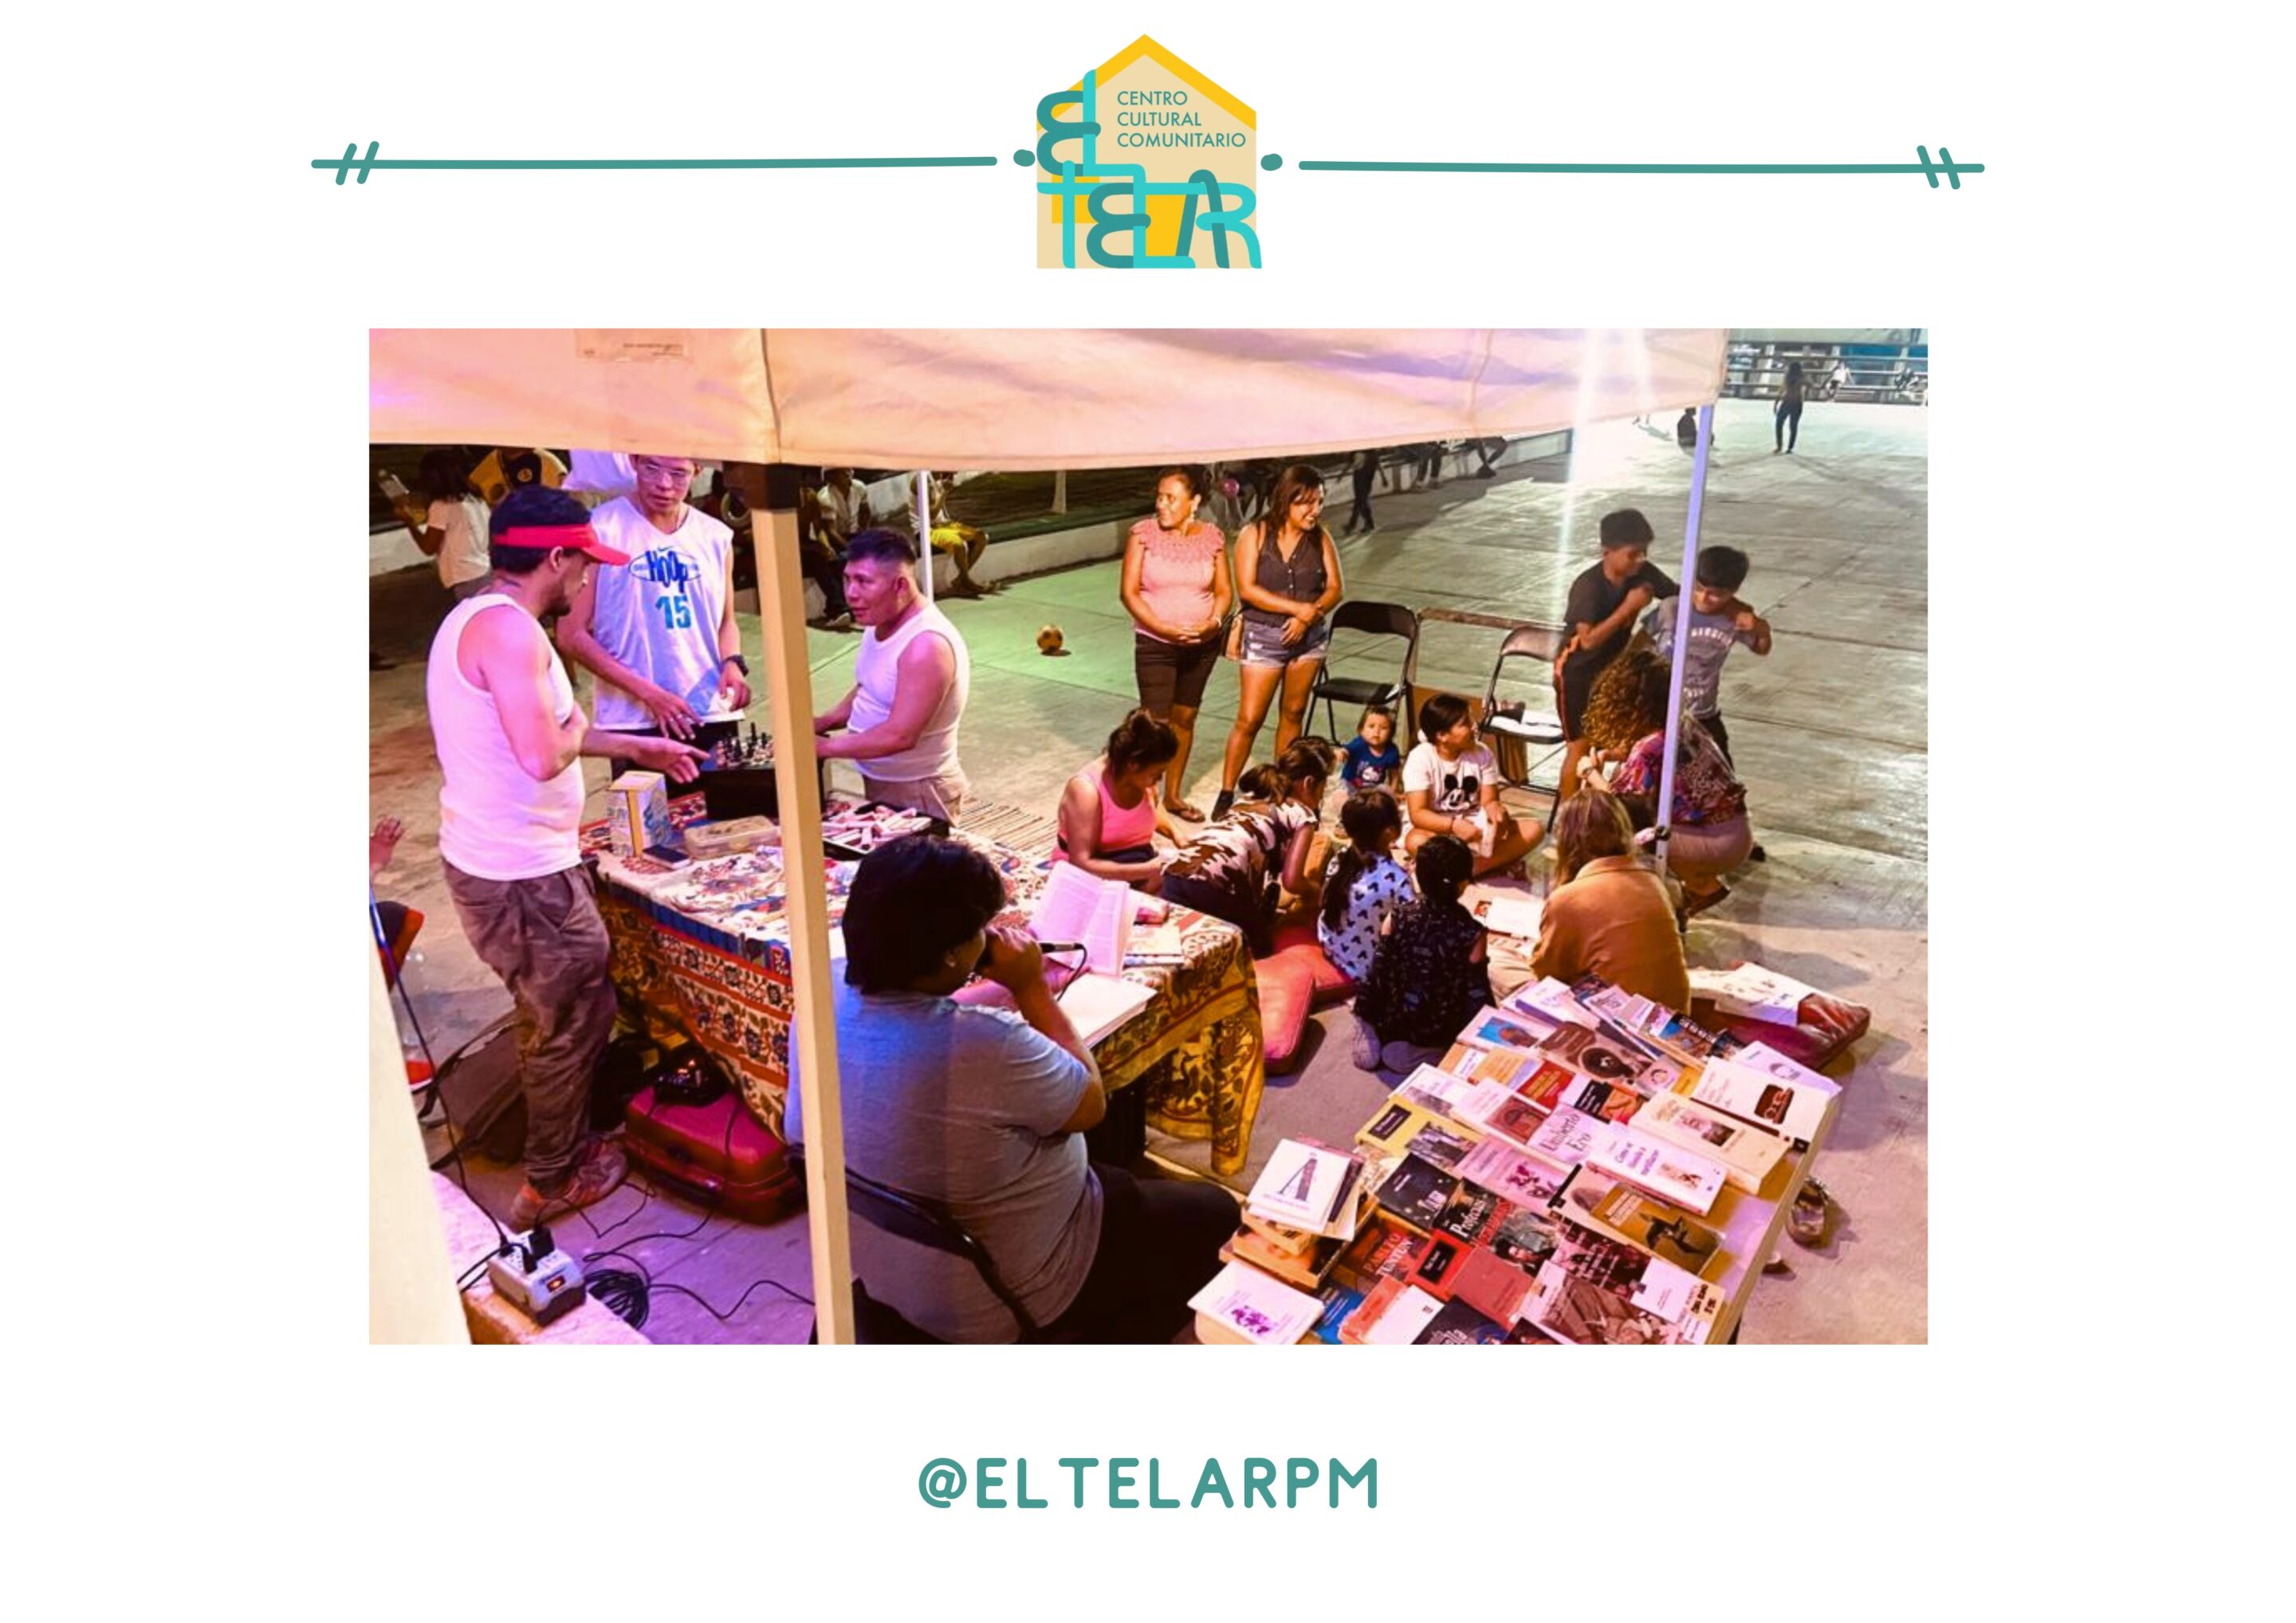 El Telar PM has a booth that they use for community outreach in the park on the colonia side of Puerto Morelos.